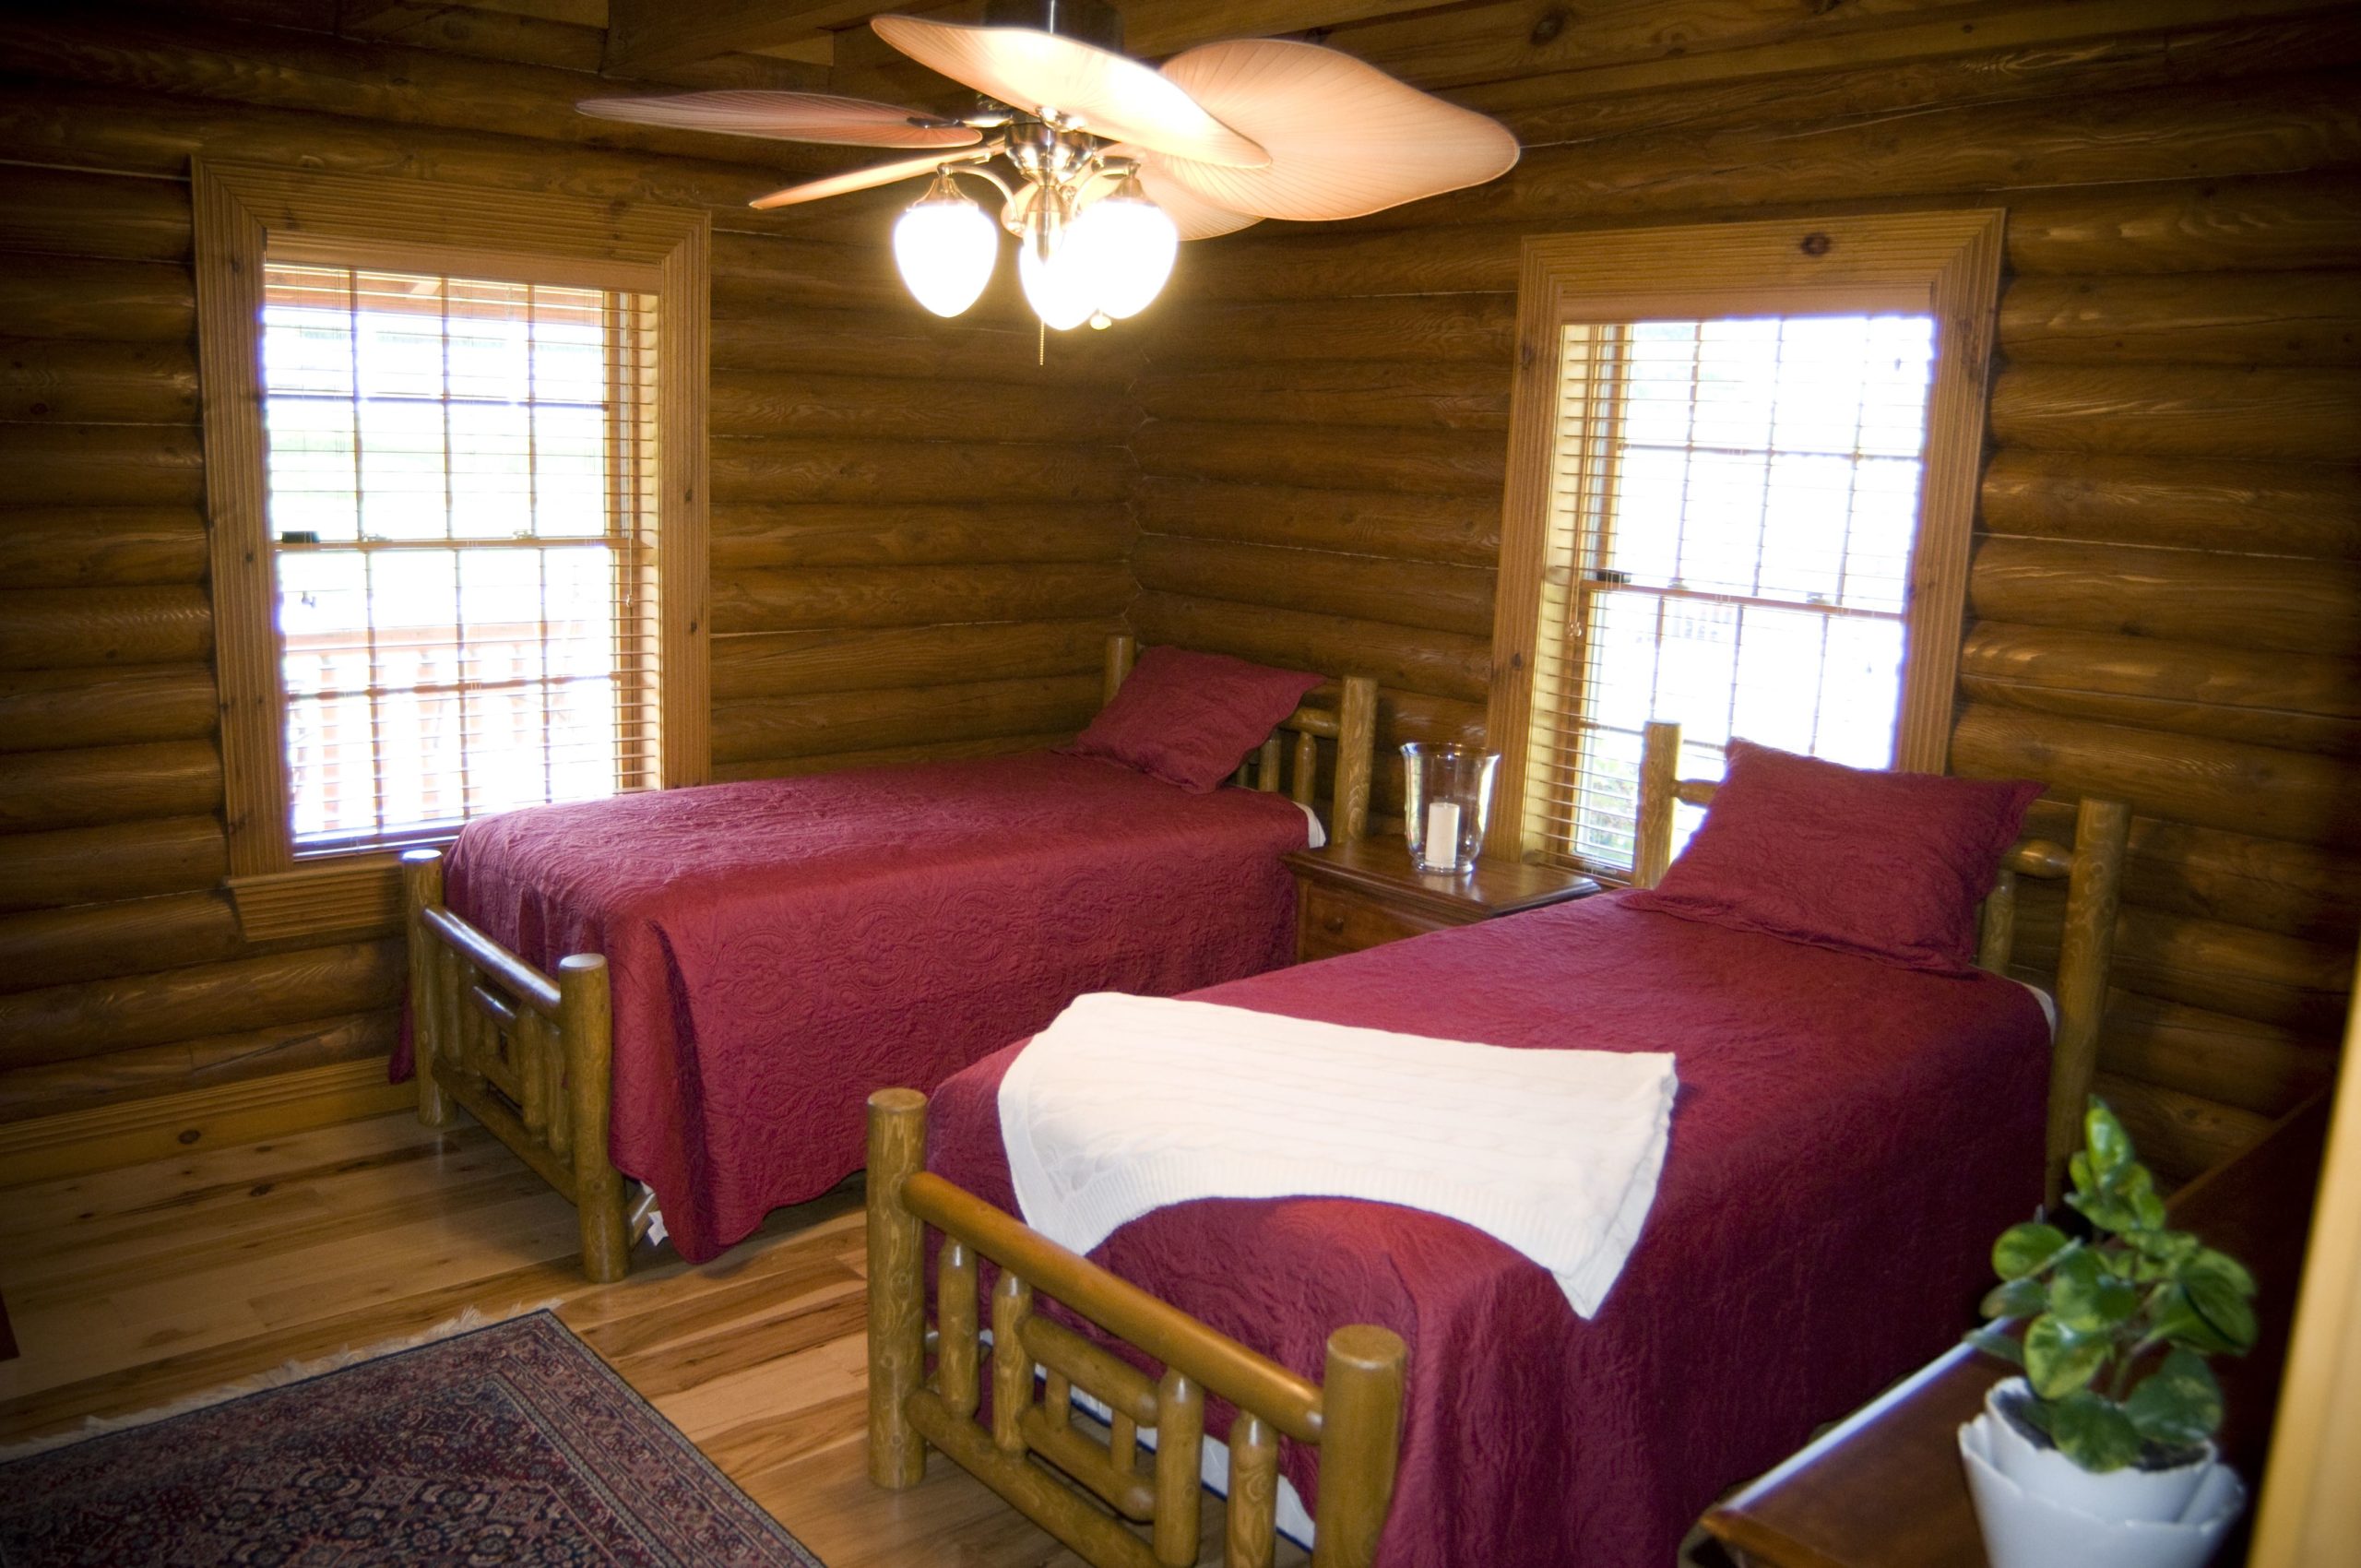 Shared bedroom in log cabin at Silvermist